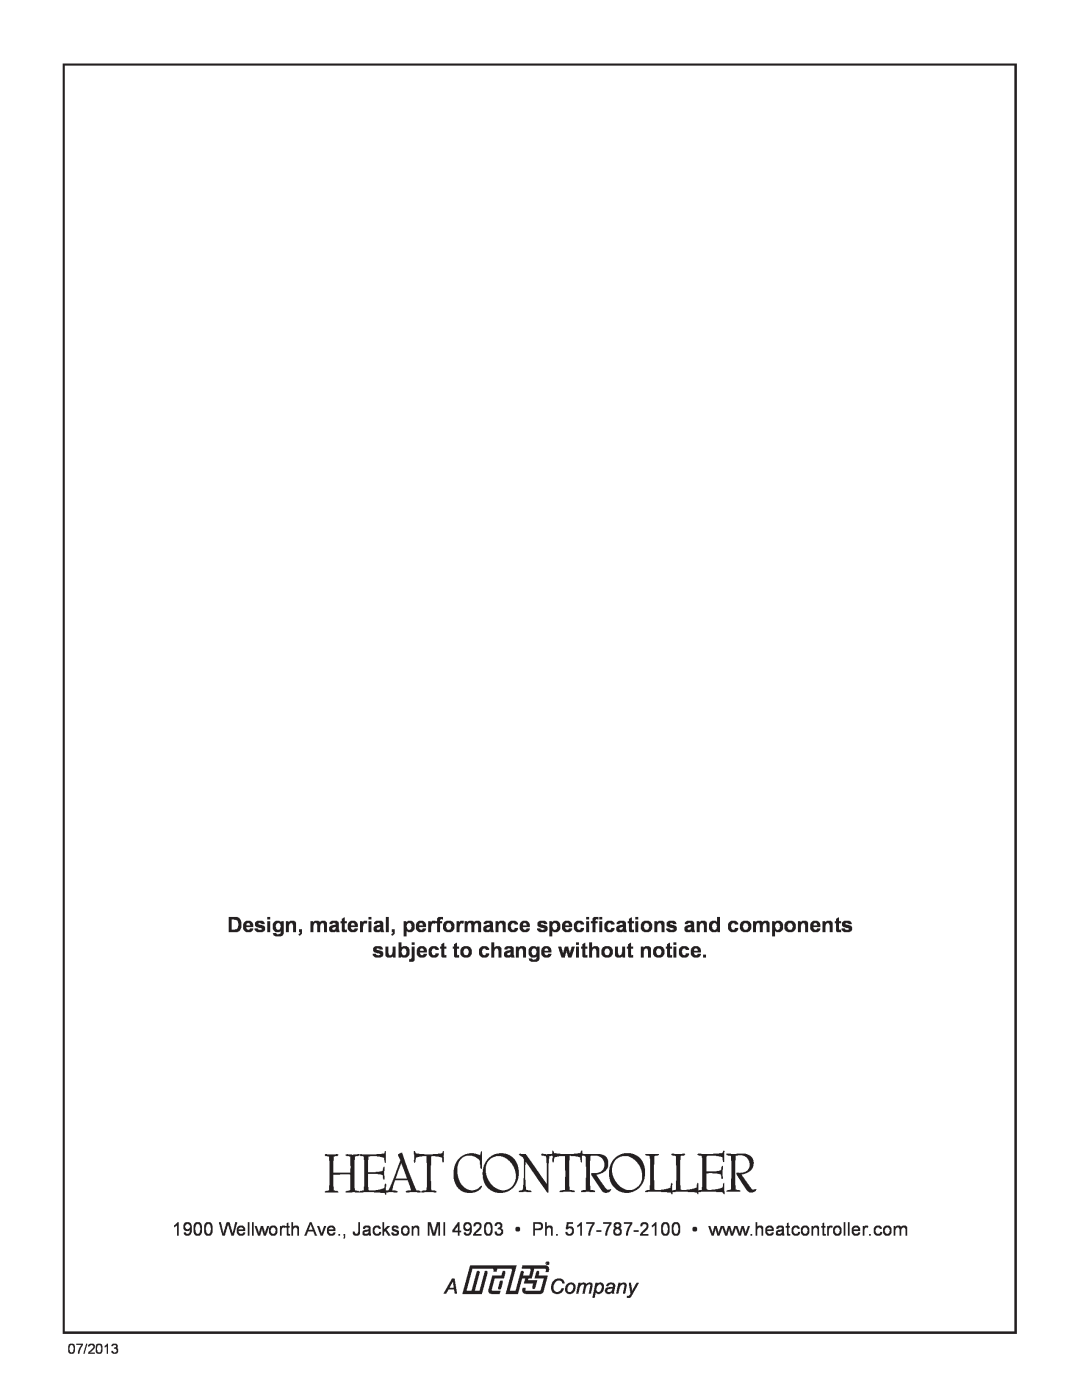 Heat Controller IRGPH15B operation manual subject to change without notice, 07/2013 